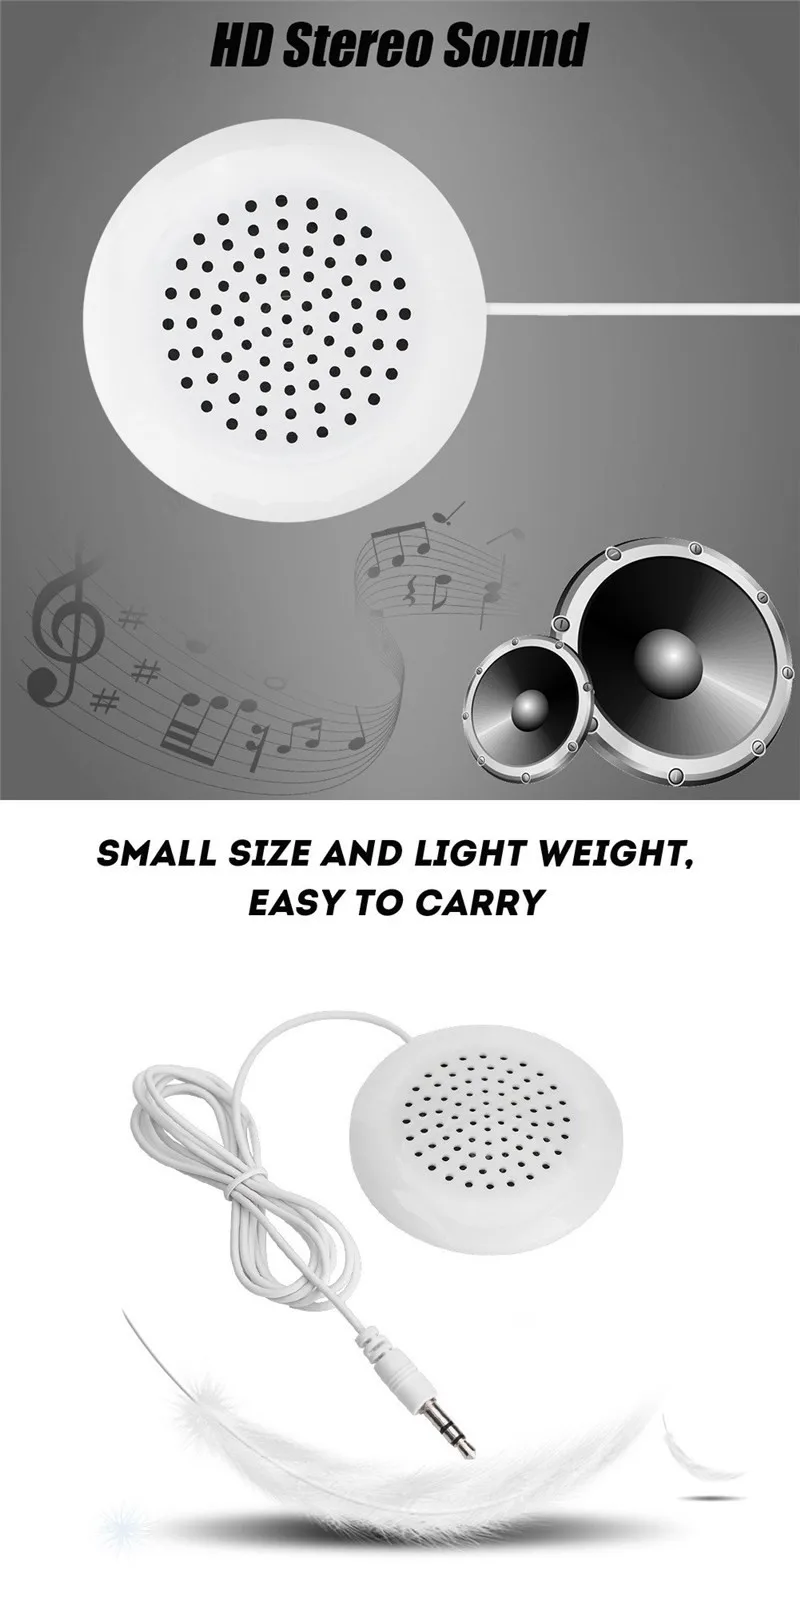 Pillow Speaker,3.5mm Jack Portable Speaker CD Player MP4 Mobile Phone etc. Under Pillow Speaker Compatible with Almost All Audio Devices with 3.5 mm Jack Such as MP3 